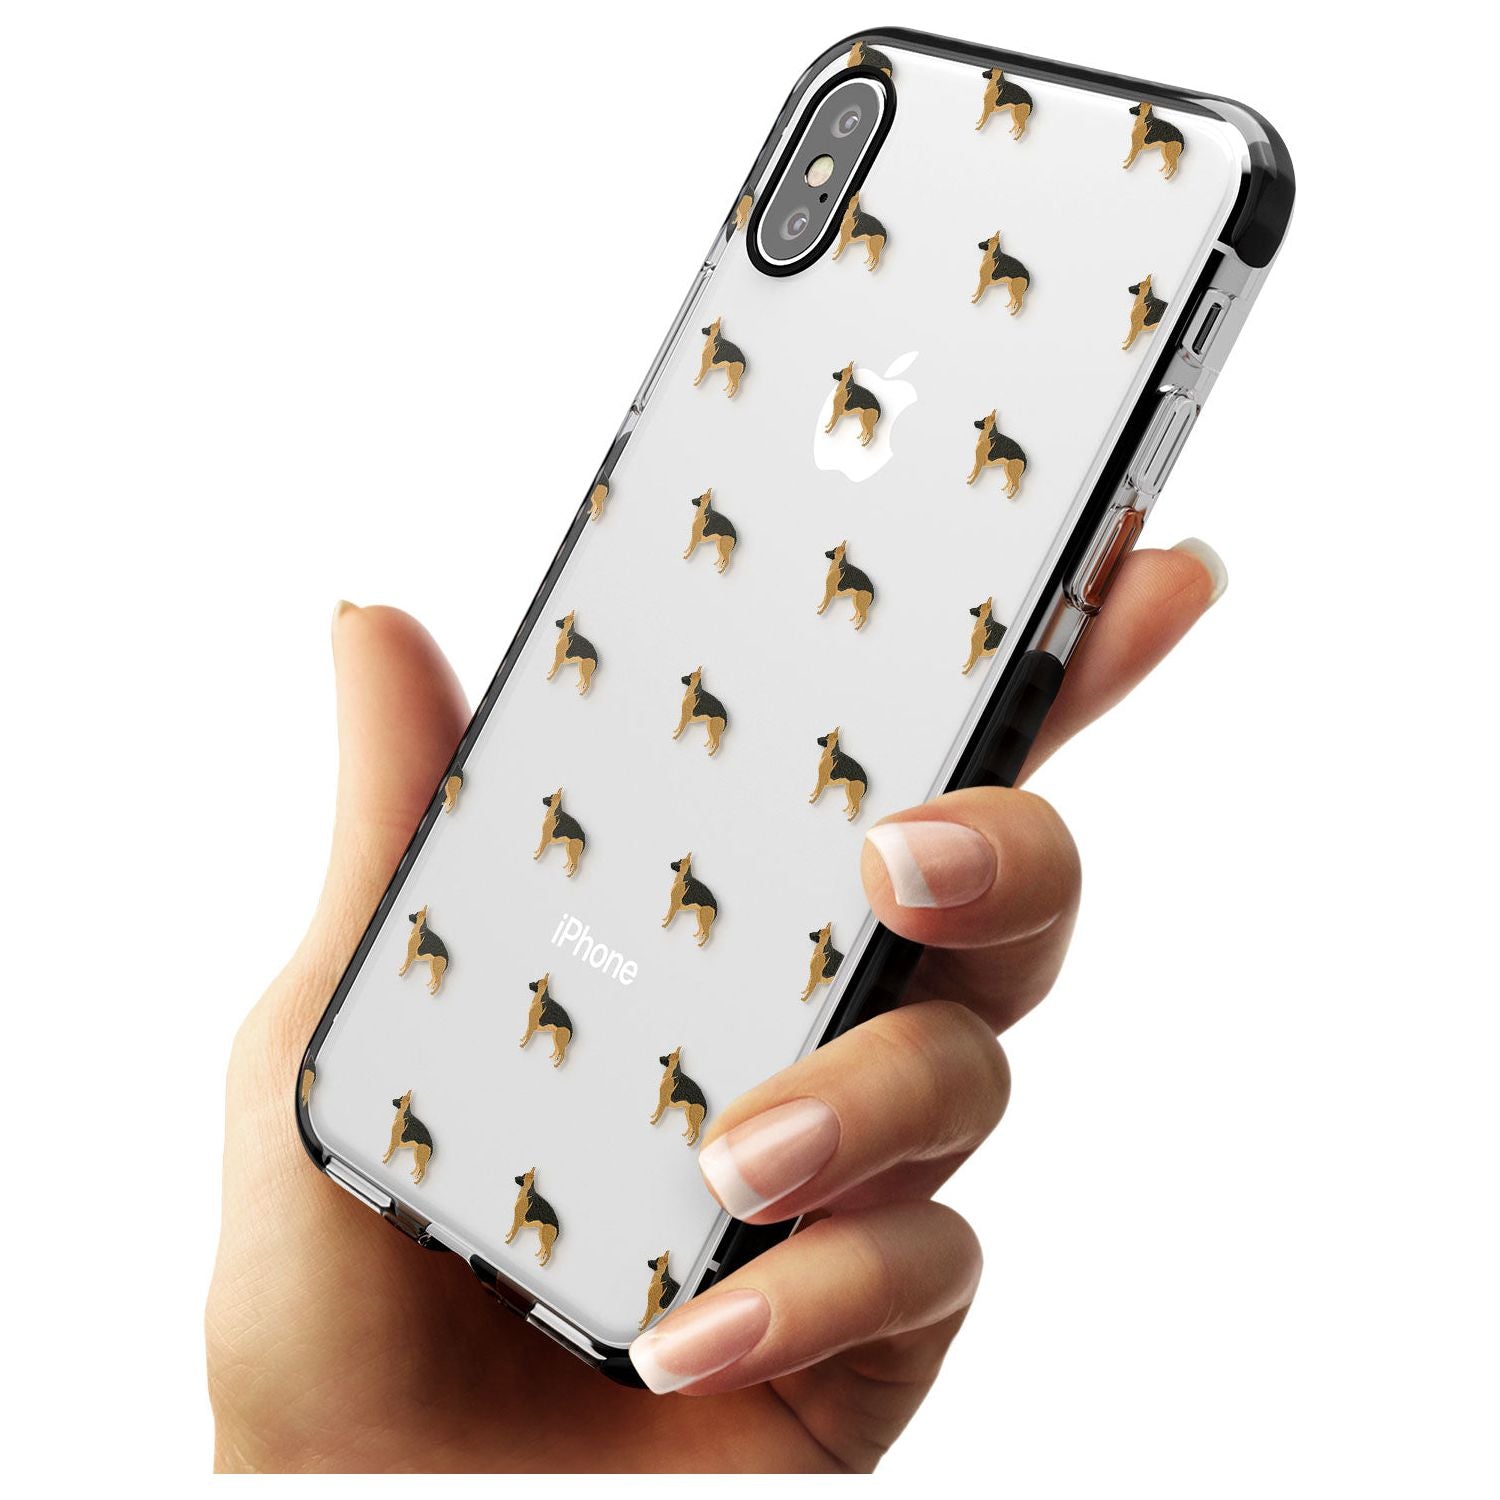 German Sherpard Dog Pattern Clear Black Impact Phone Case for iPhone X XS Max XR